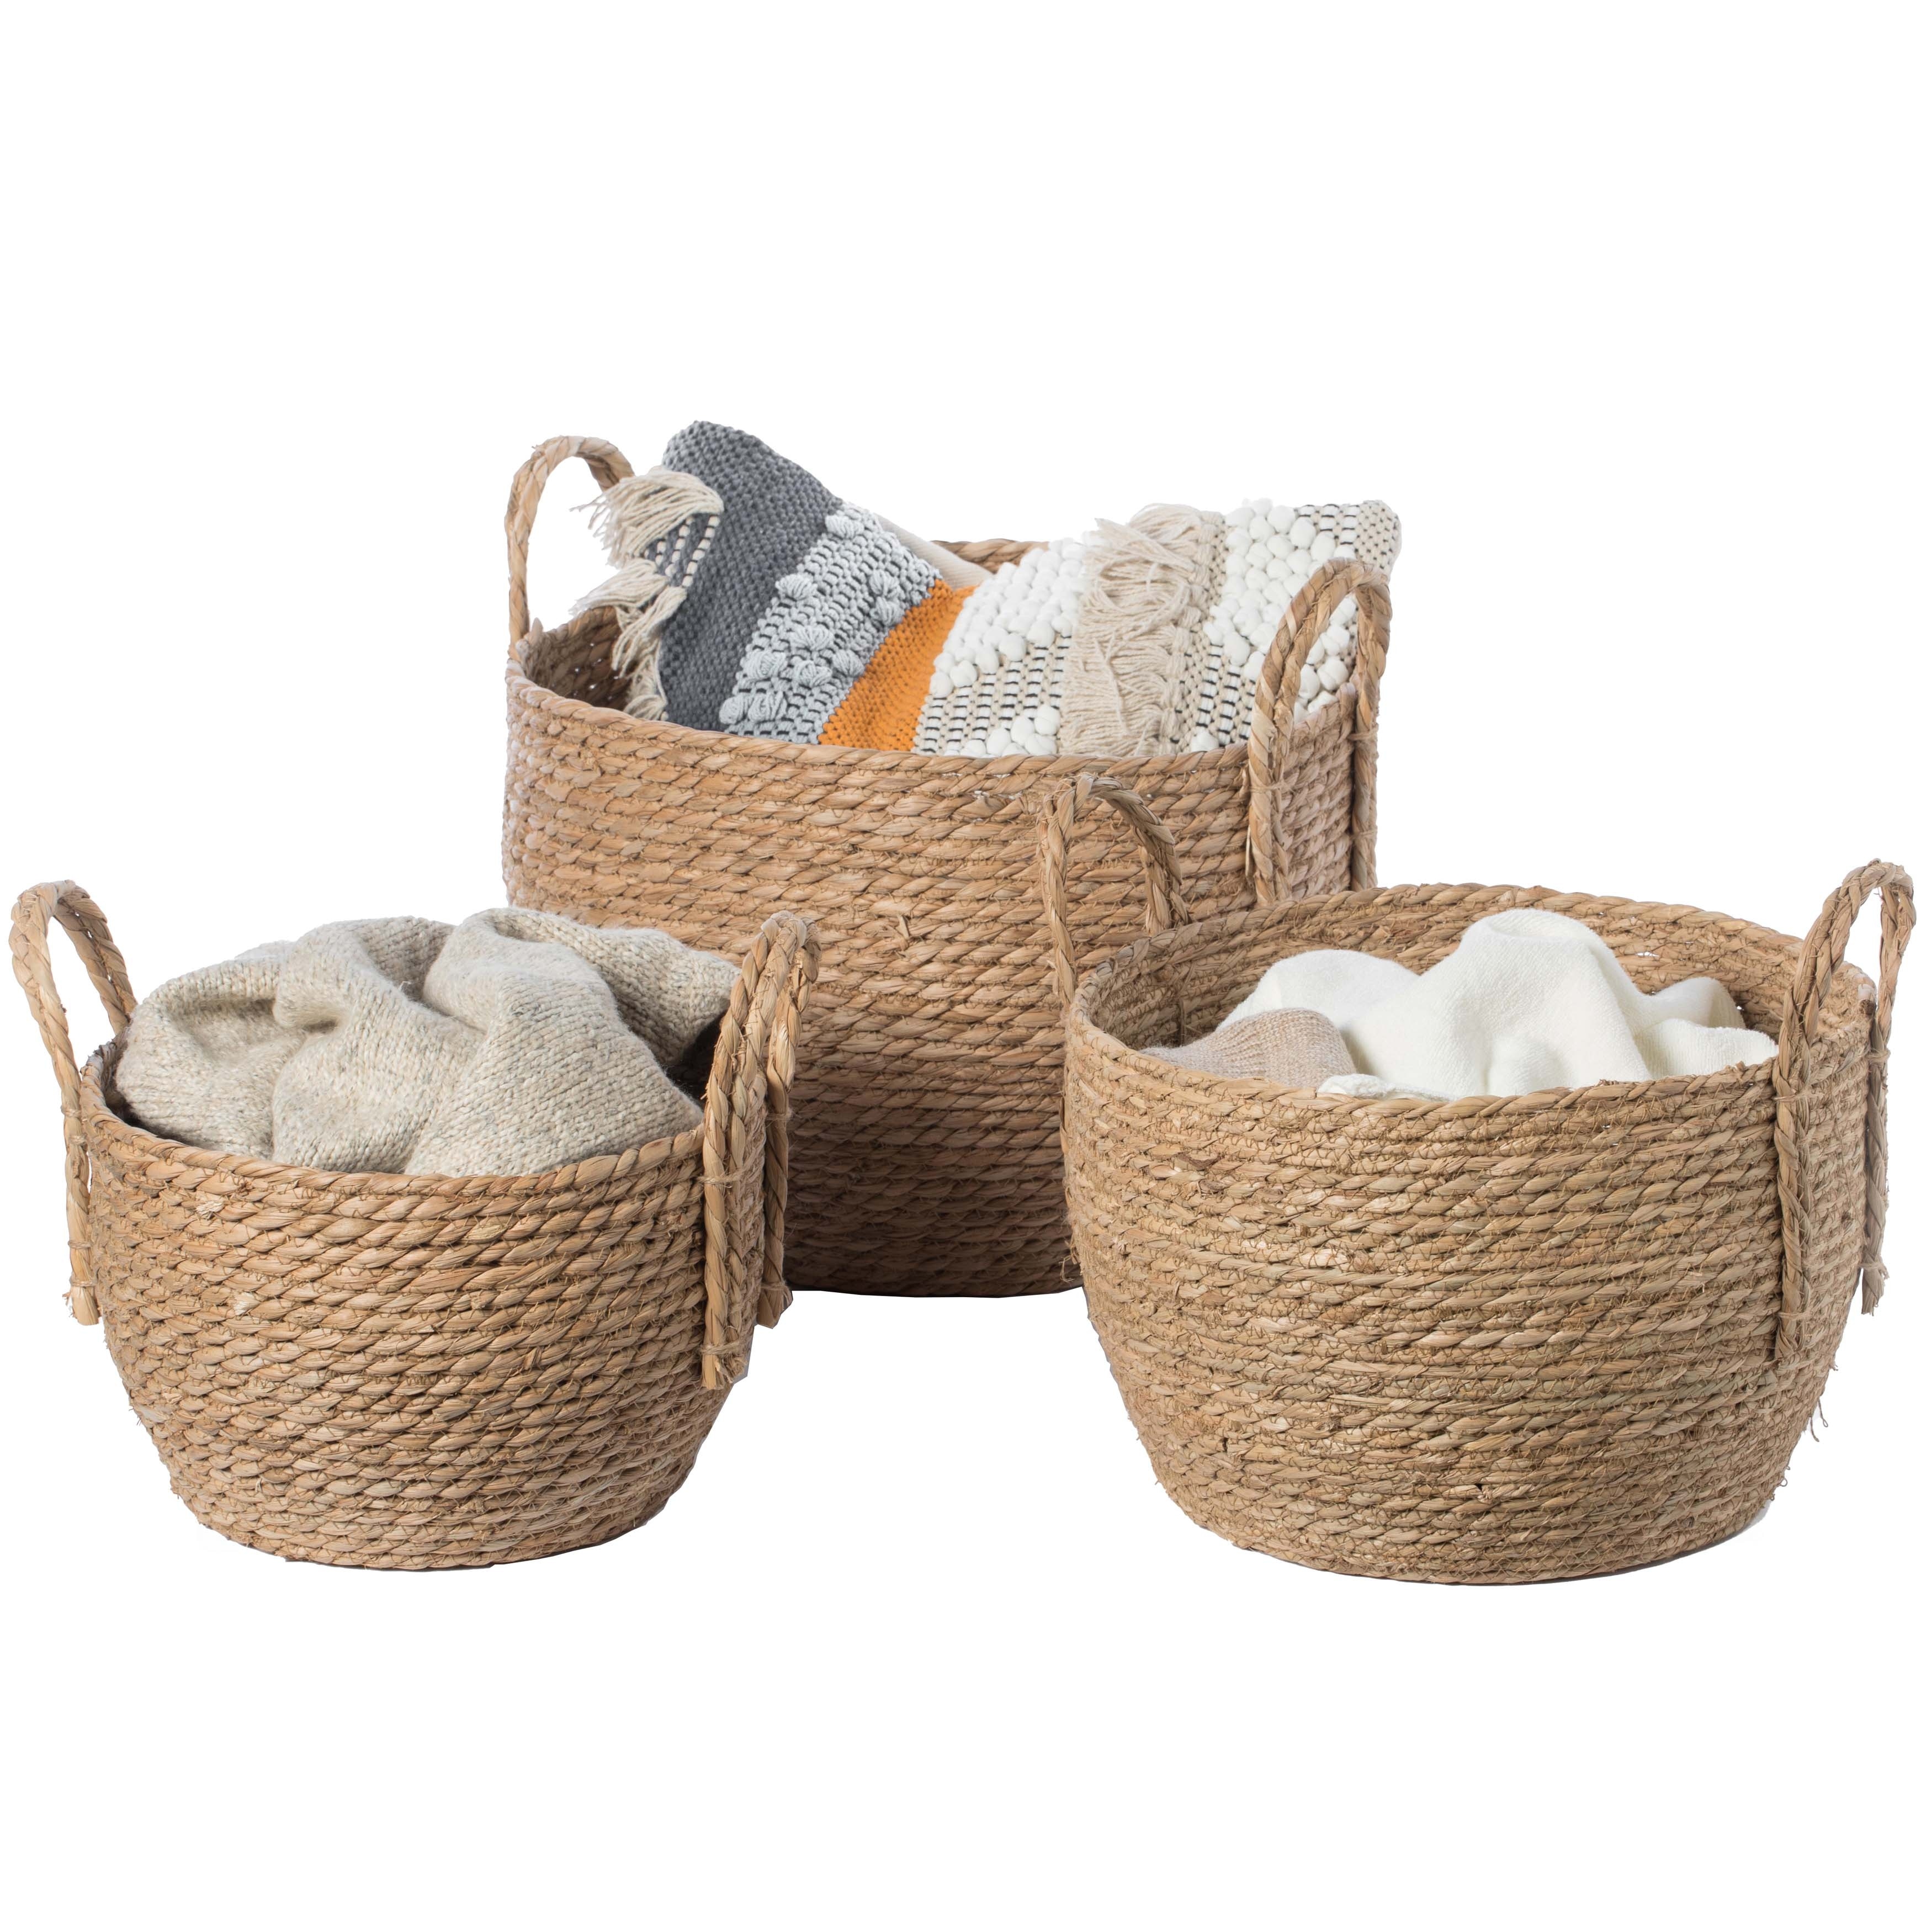 https://ak1.ostkcdn.com/images/products/is/images/direct/b2ef534312c53767c4eaa8b057a8c29236836f7a/Decorative-Round-Wicker-Woven-Rope-Storage-Blanket-Basket-with-Braided-Handles---Set-of-3.jpg